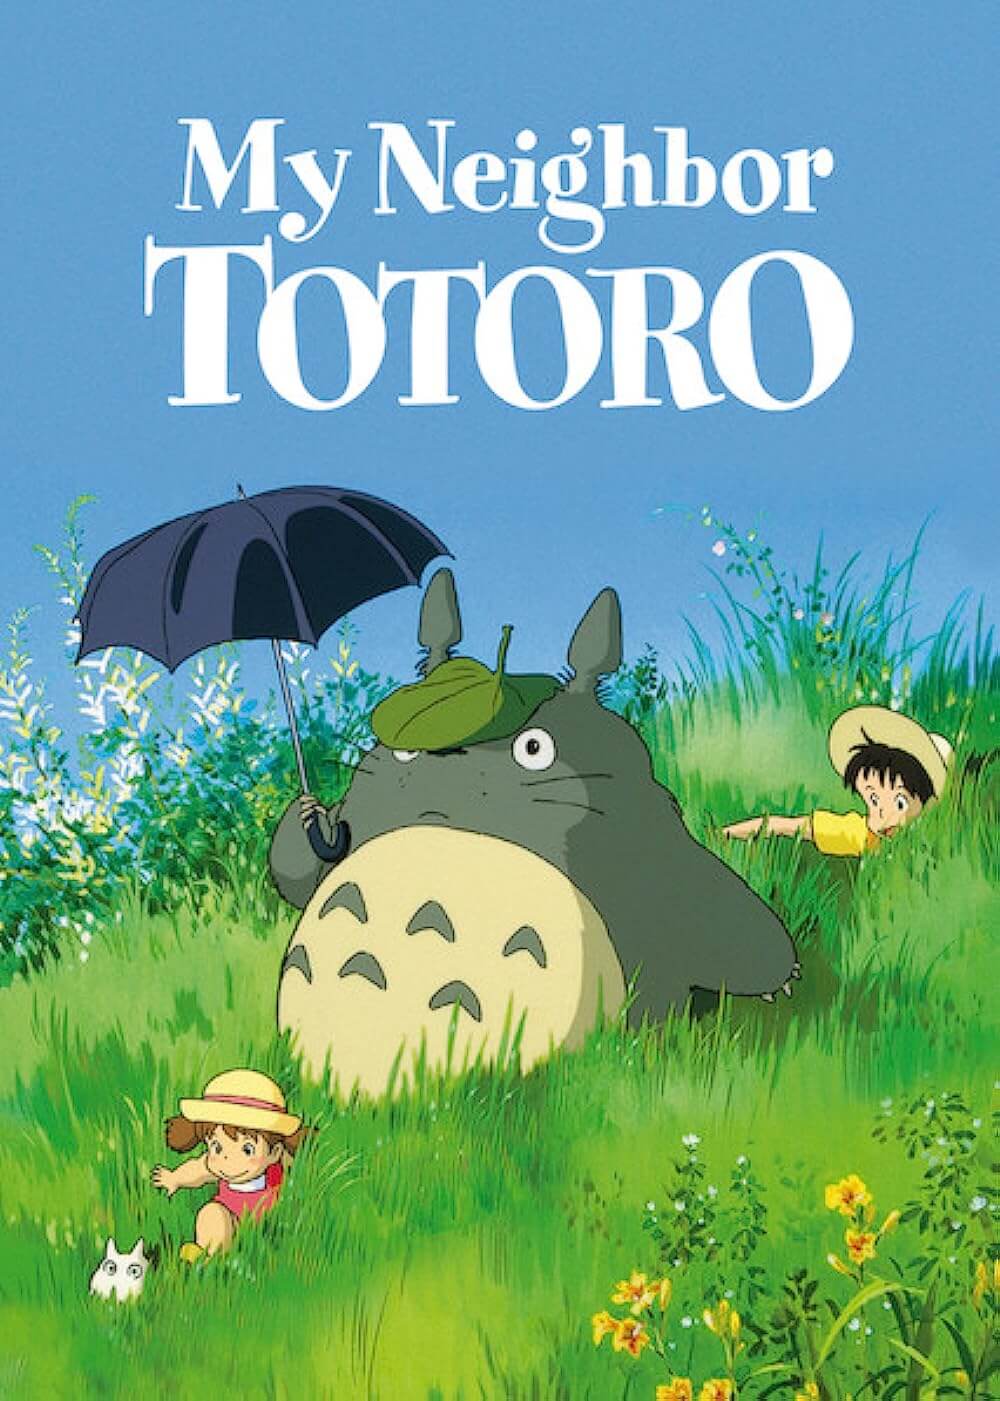 Watch My Neighbor Totoro today, it's one of the best Studio Ghibli movies and best Netflix G rated movies (8+ year olds).